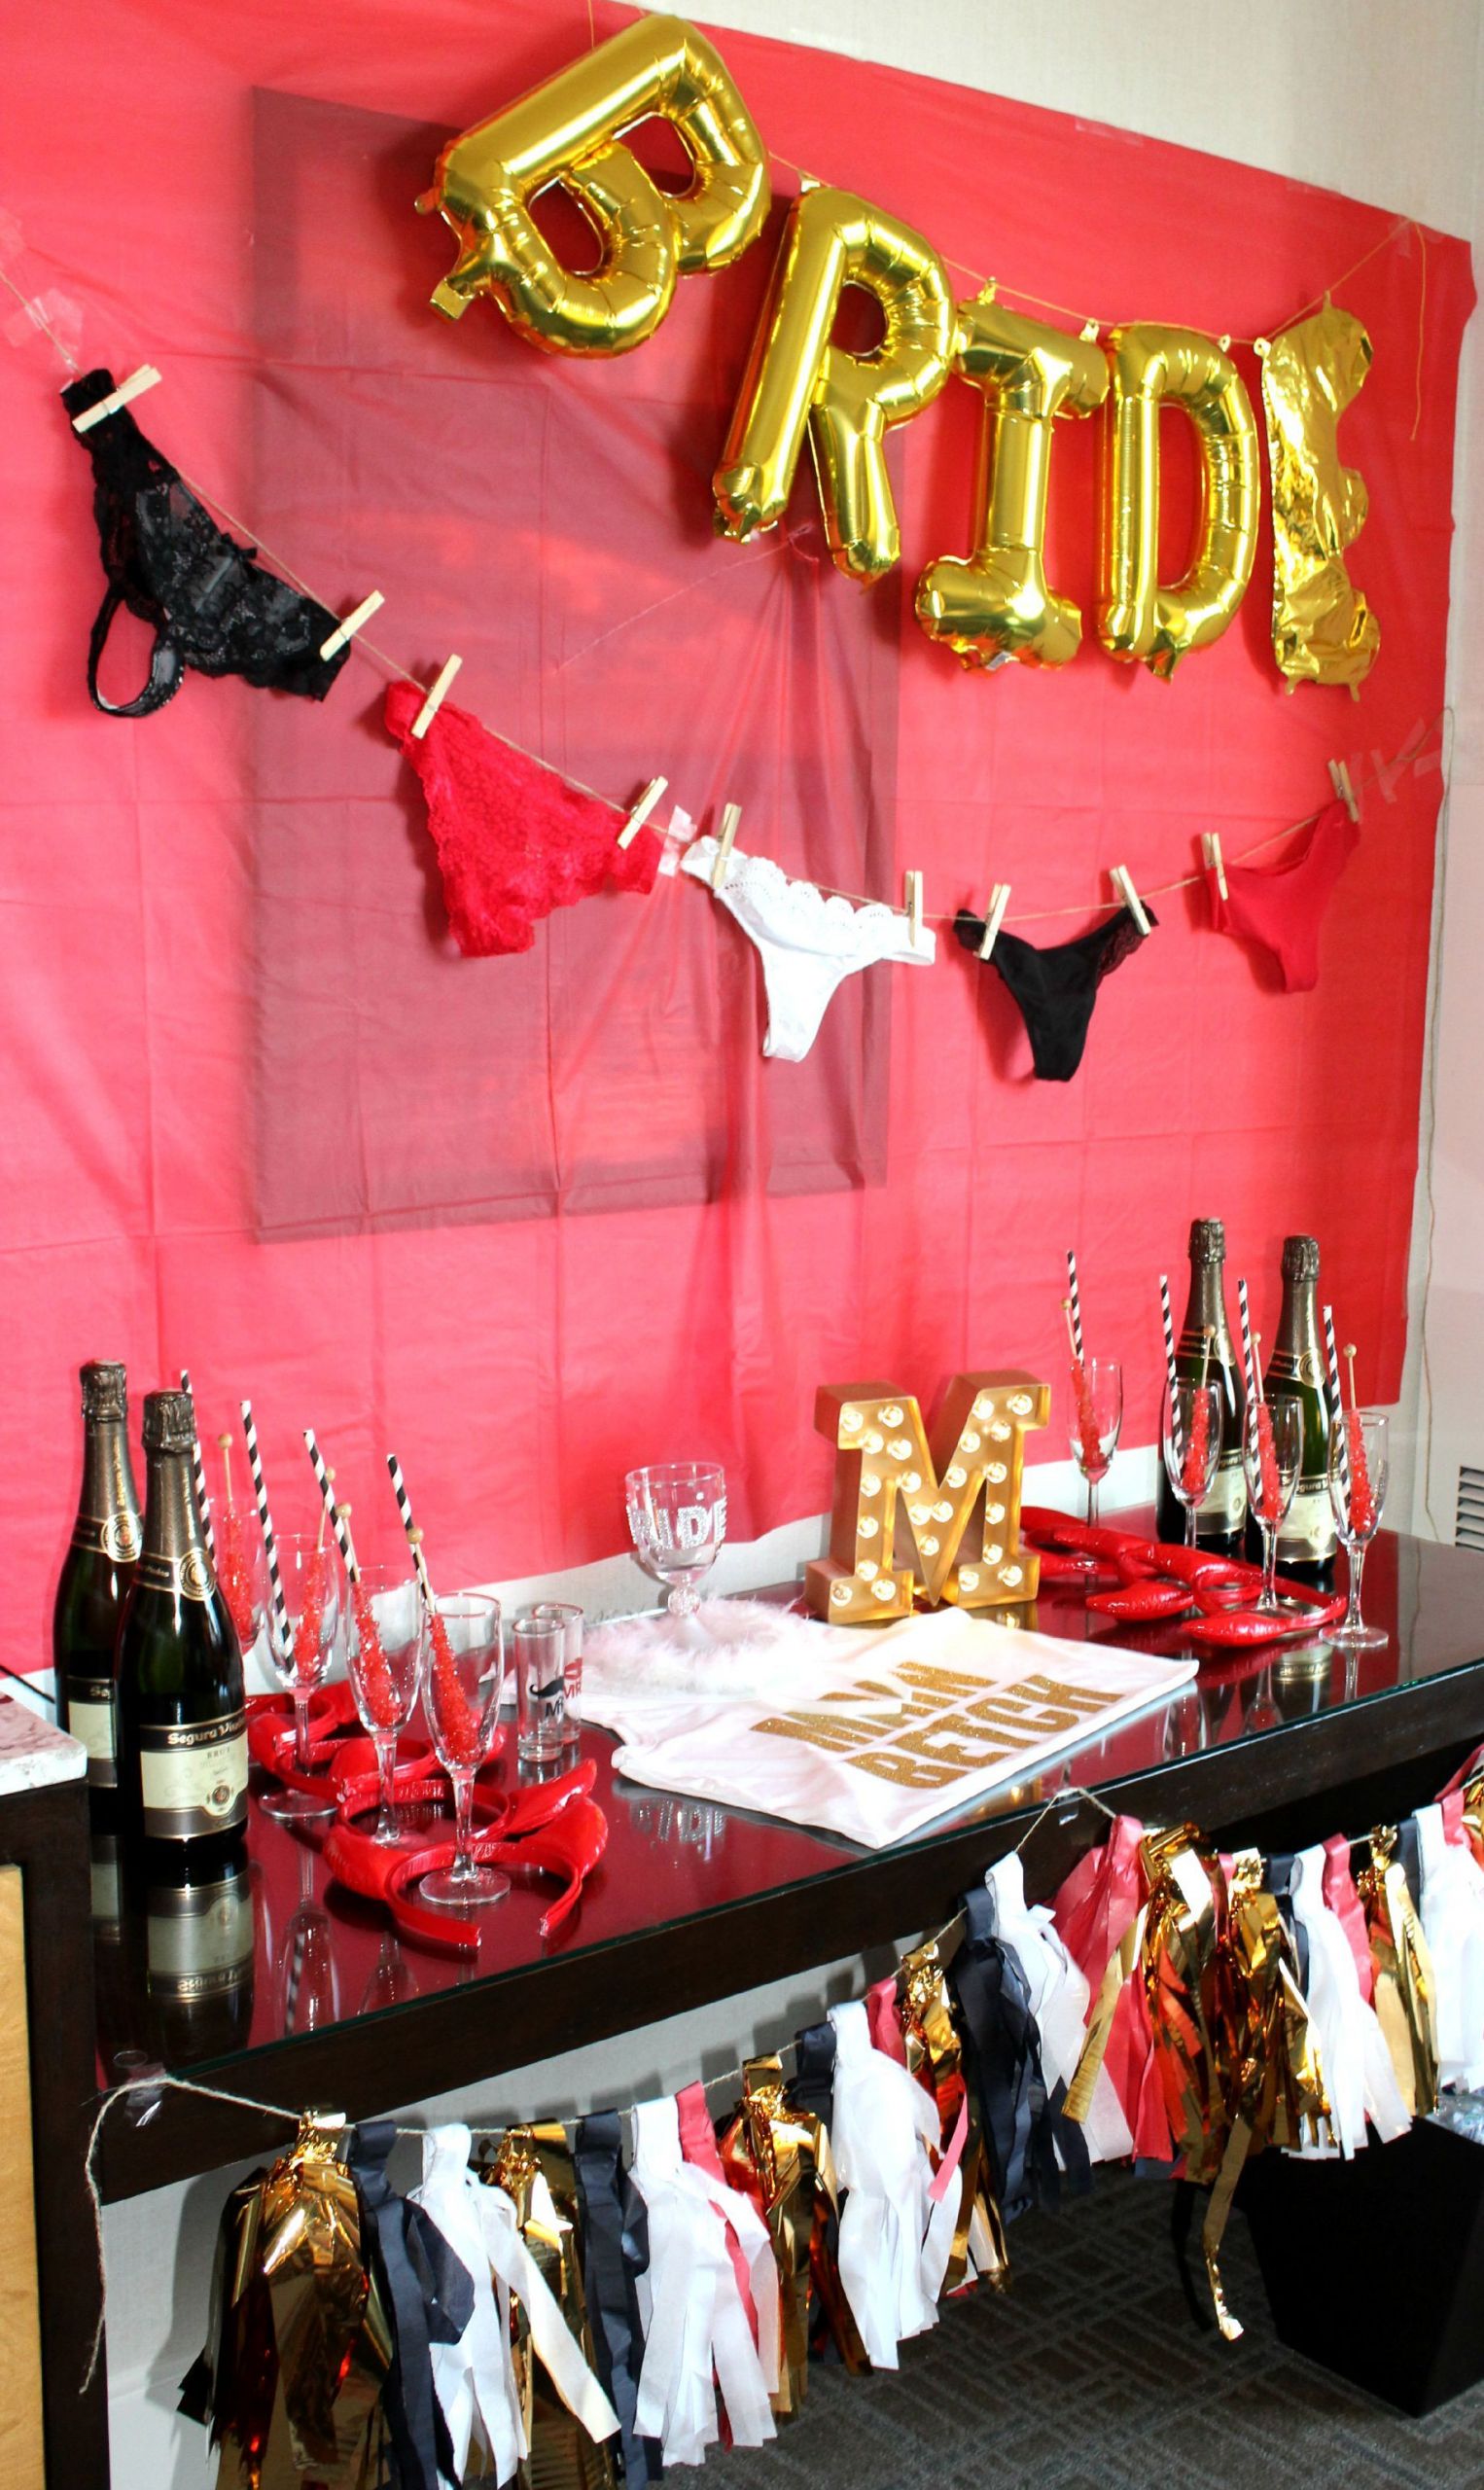 Bachelorette Party Decorating Ideas
 Pin by brittney paden on Bachelorette Party